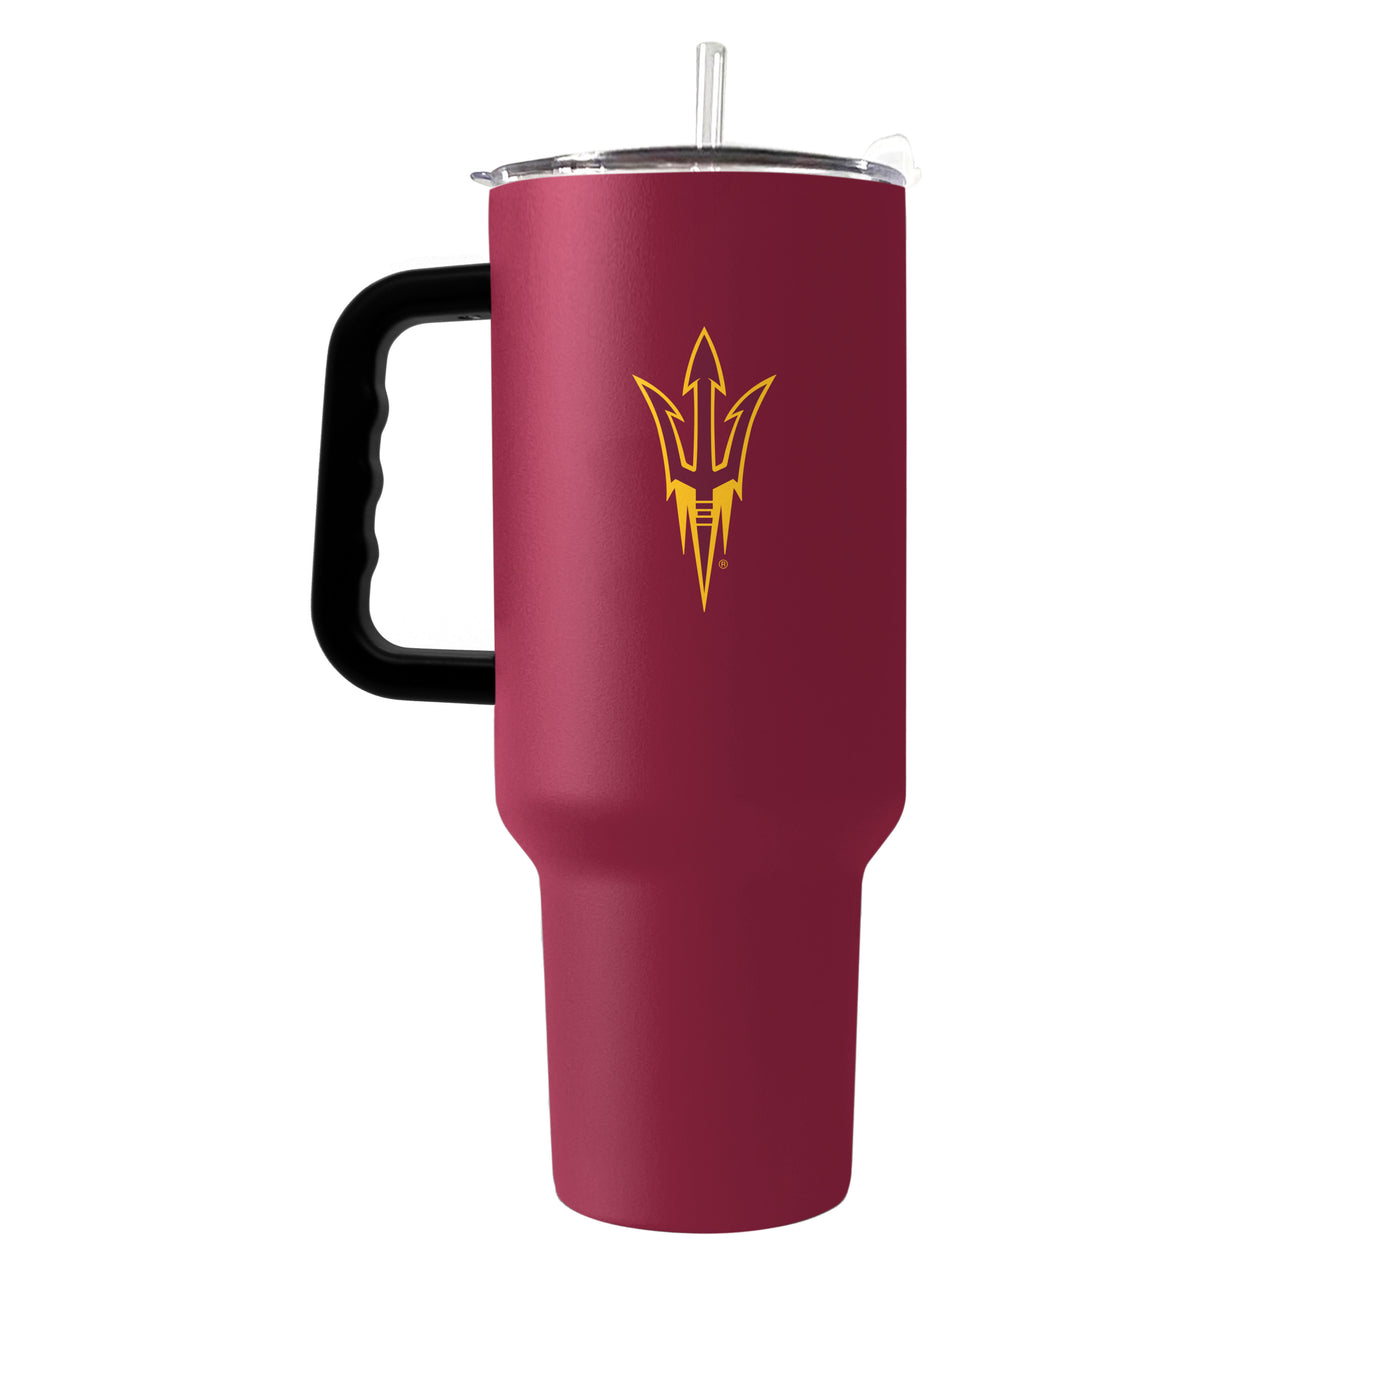 Backside of ASU maroon tumbler with a gold outline of the pitchfork logo